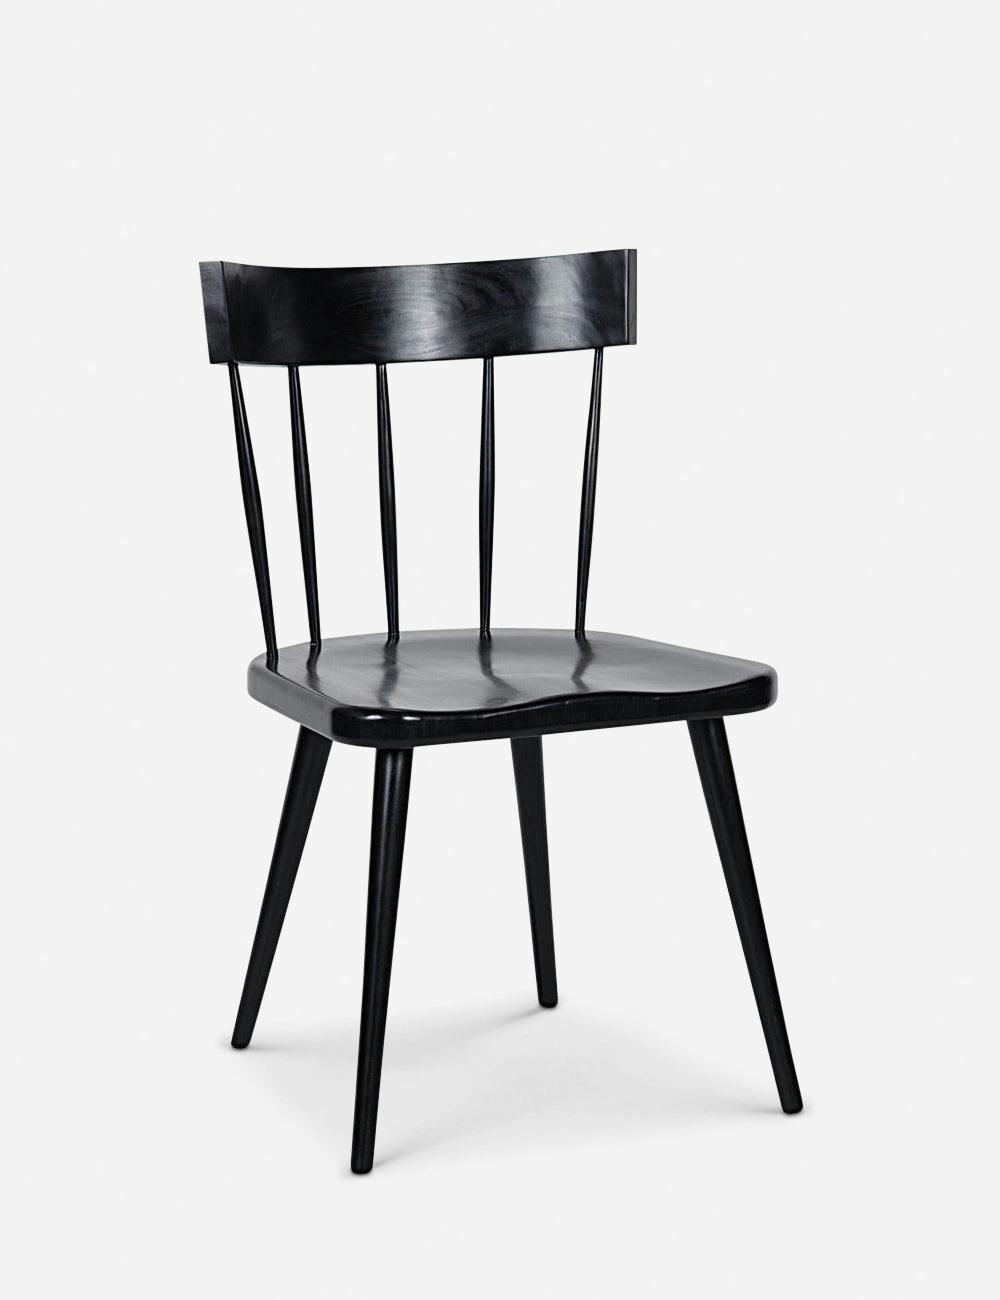 Neema Solid Wood Hand-Rubbed Black Windsor Dining Chair